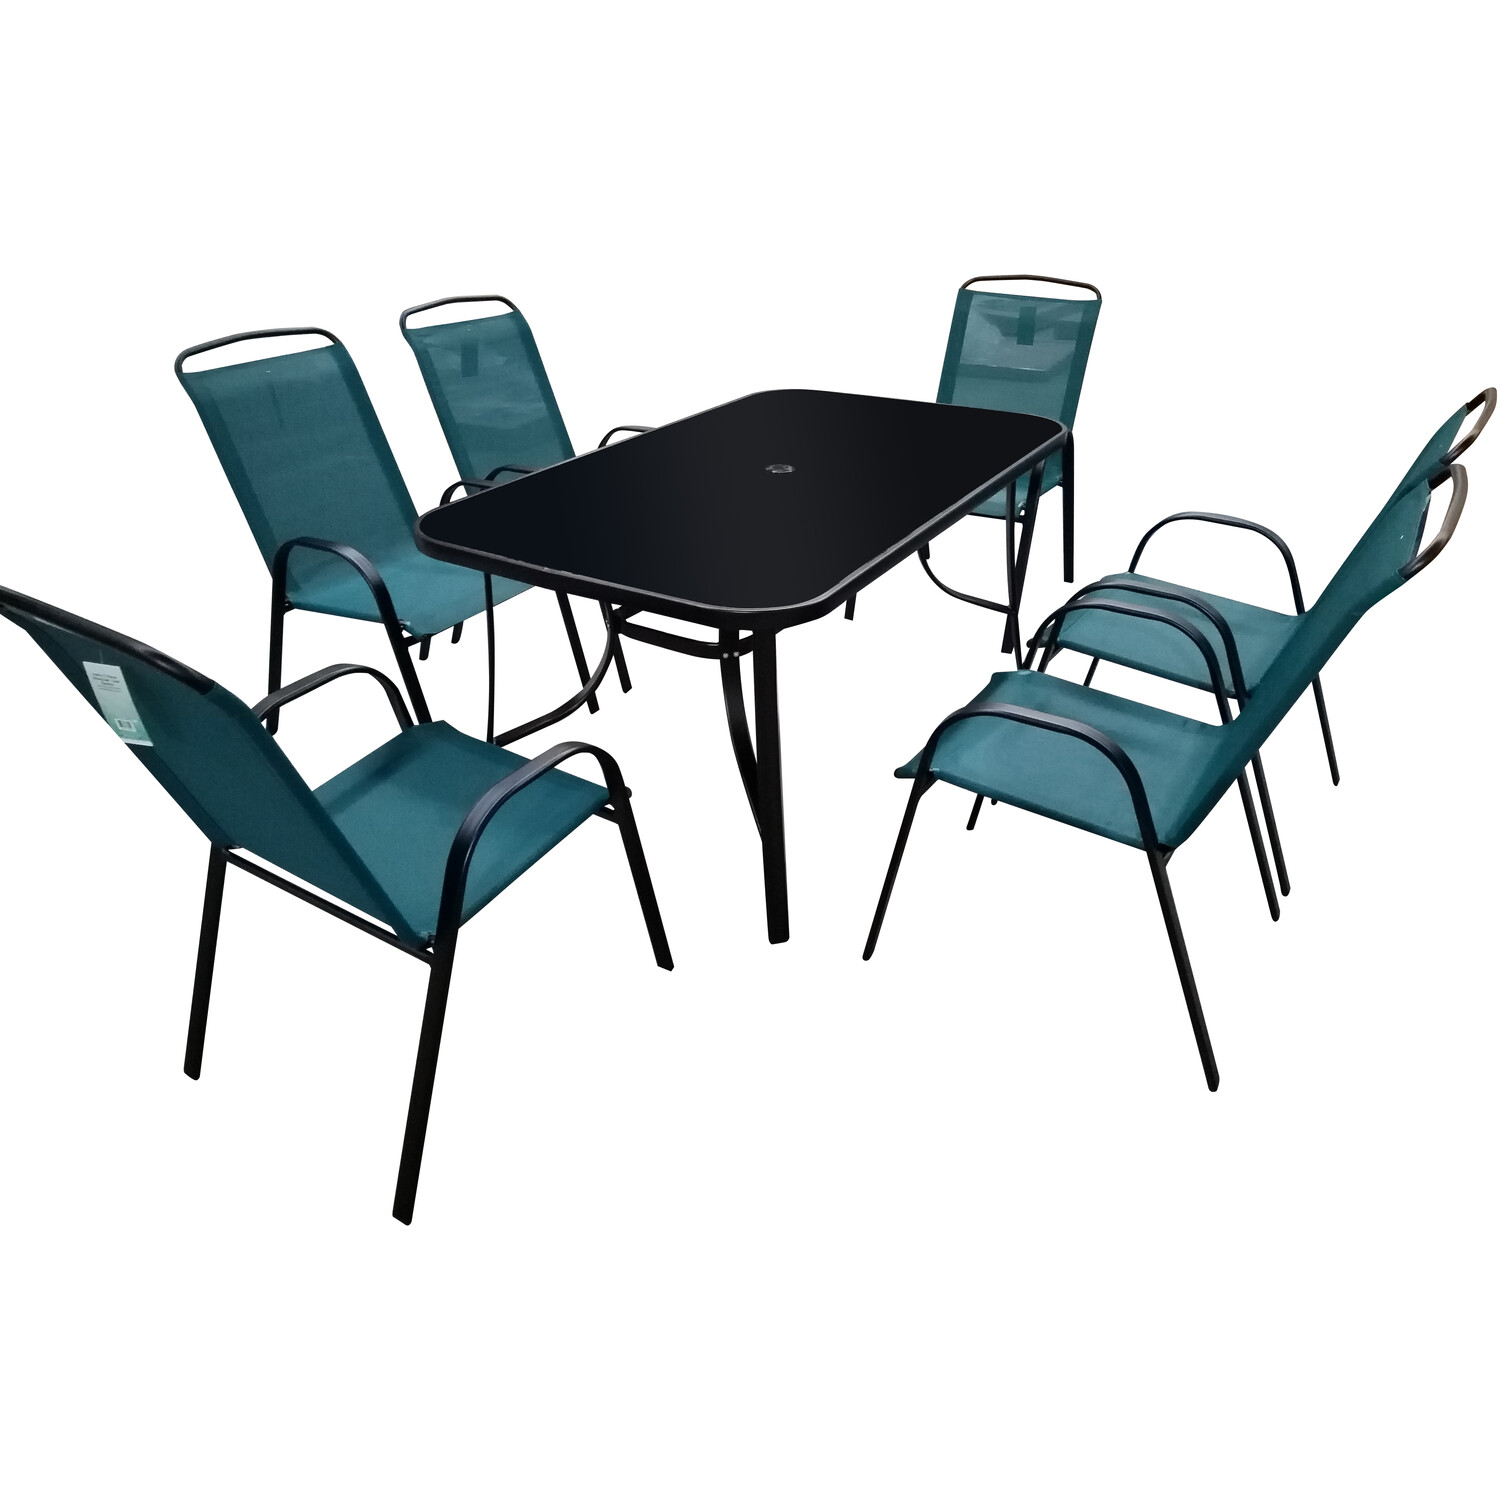 Outdoor Essentials Palma Steel 6 Seater Patio Dining Set Teal Image 2